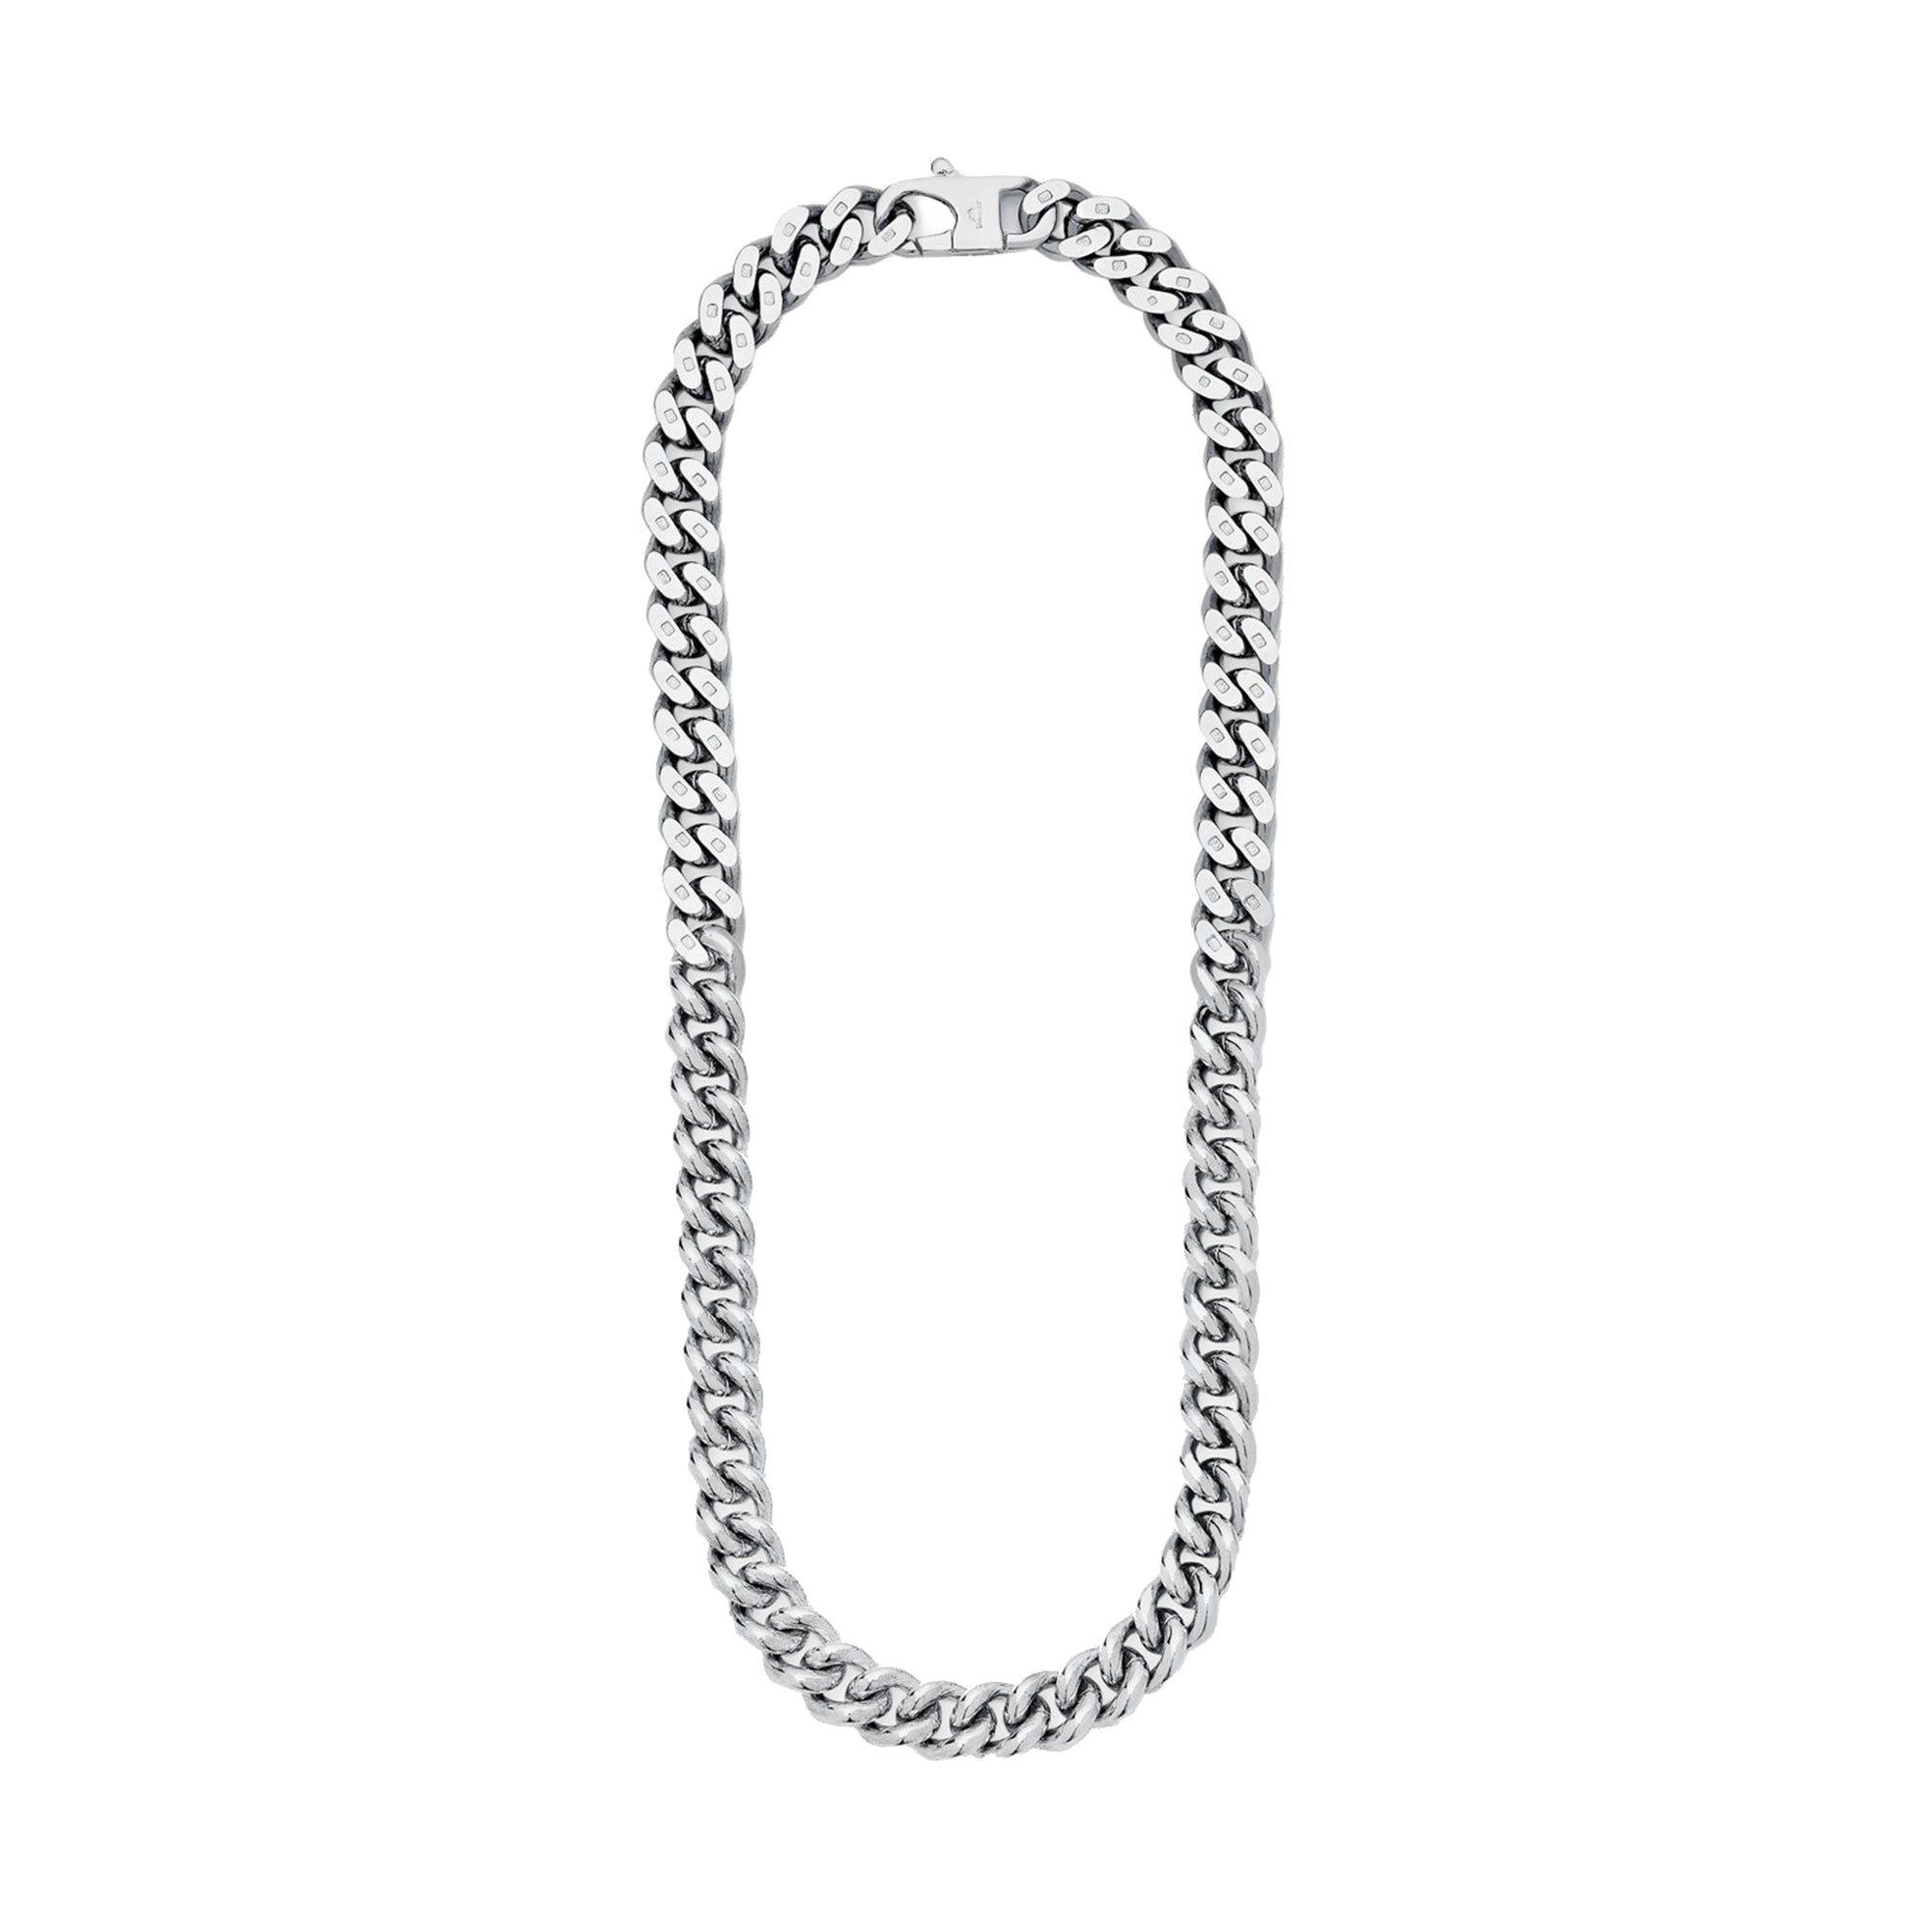 BUNNEY - Curb Change Necklace Thick / Silver 925 B0300158 view 1